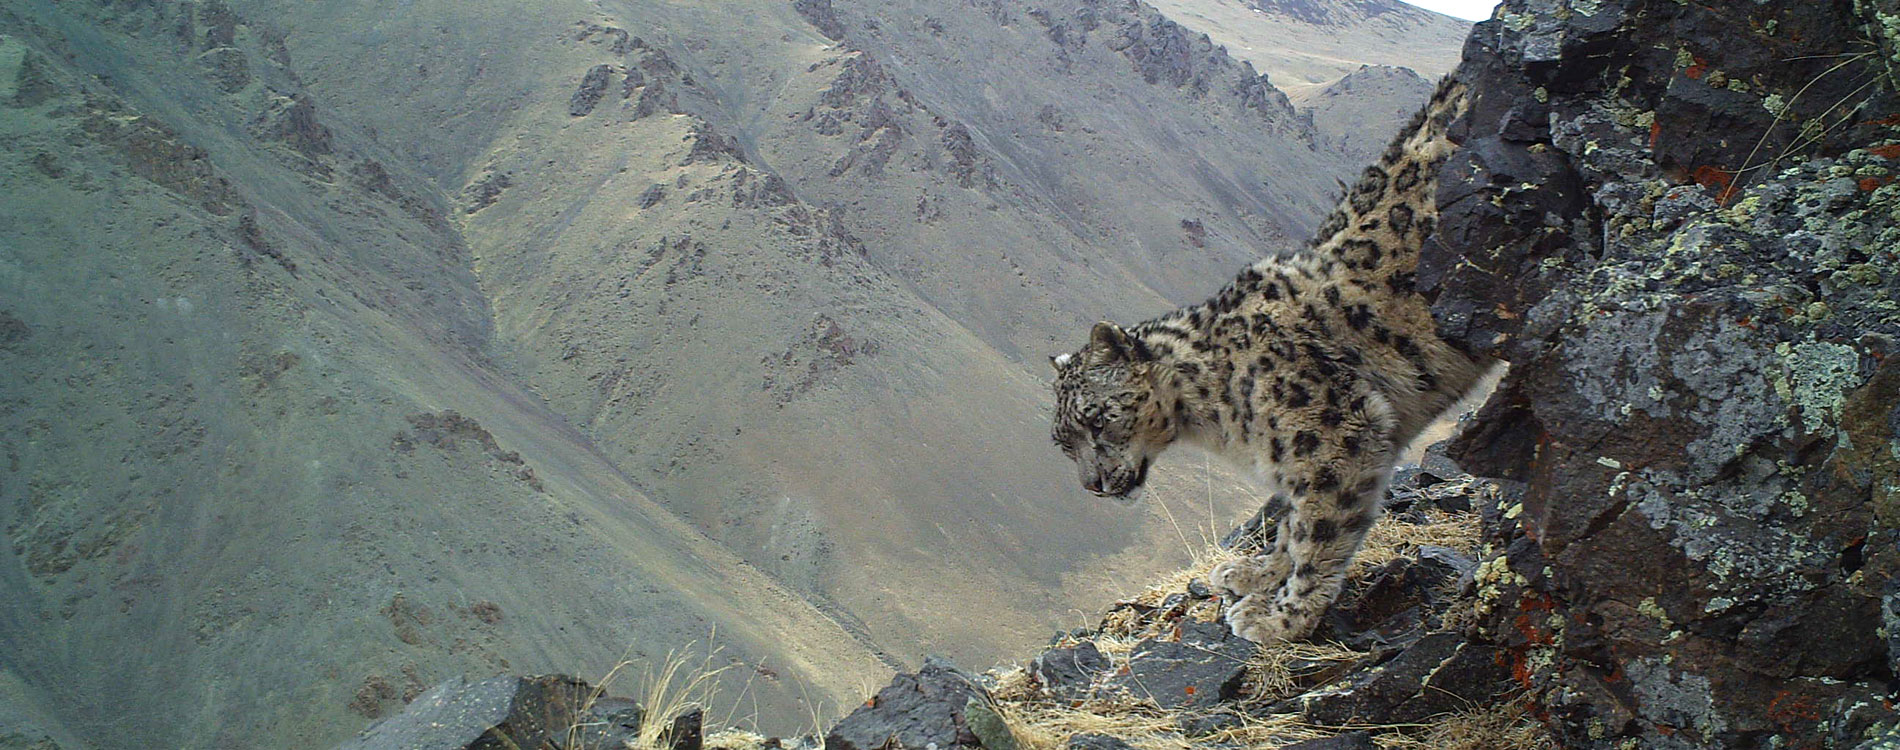 quest-for-the-snow-leopard